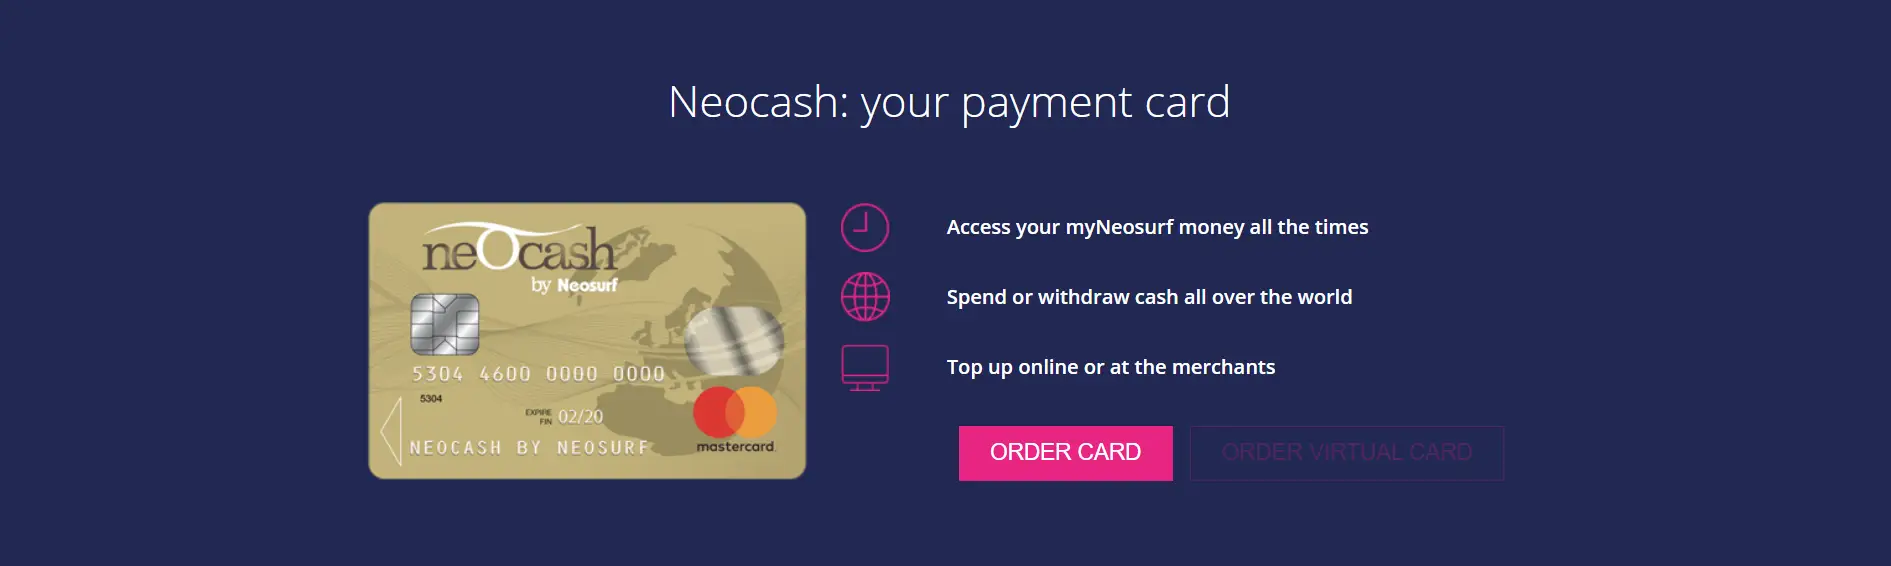 Neocash payment card